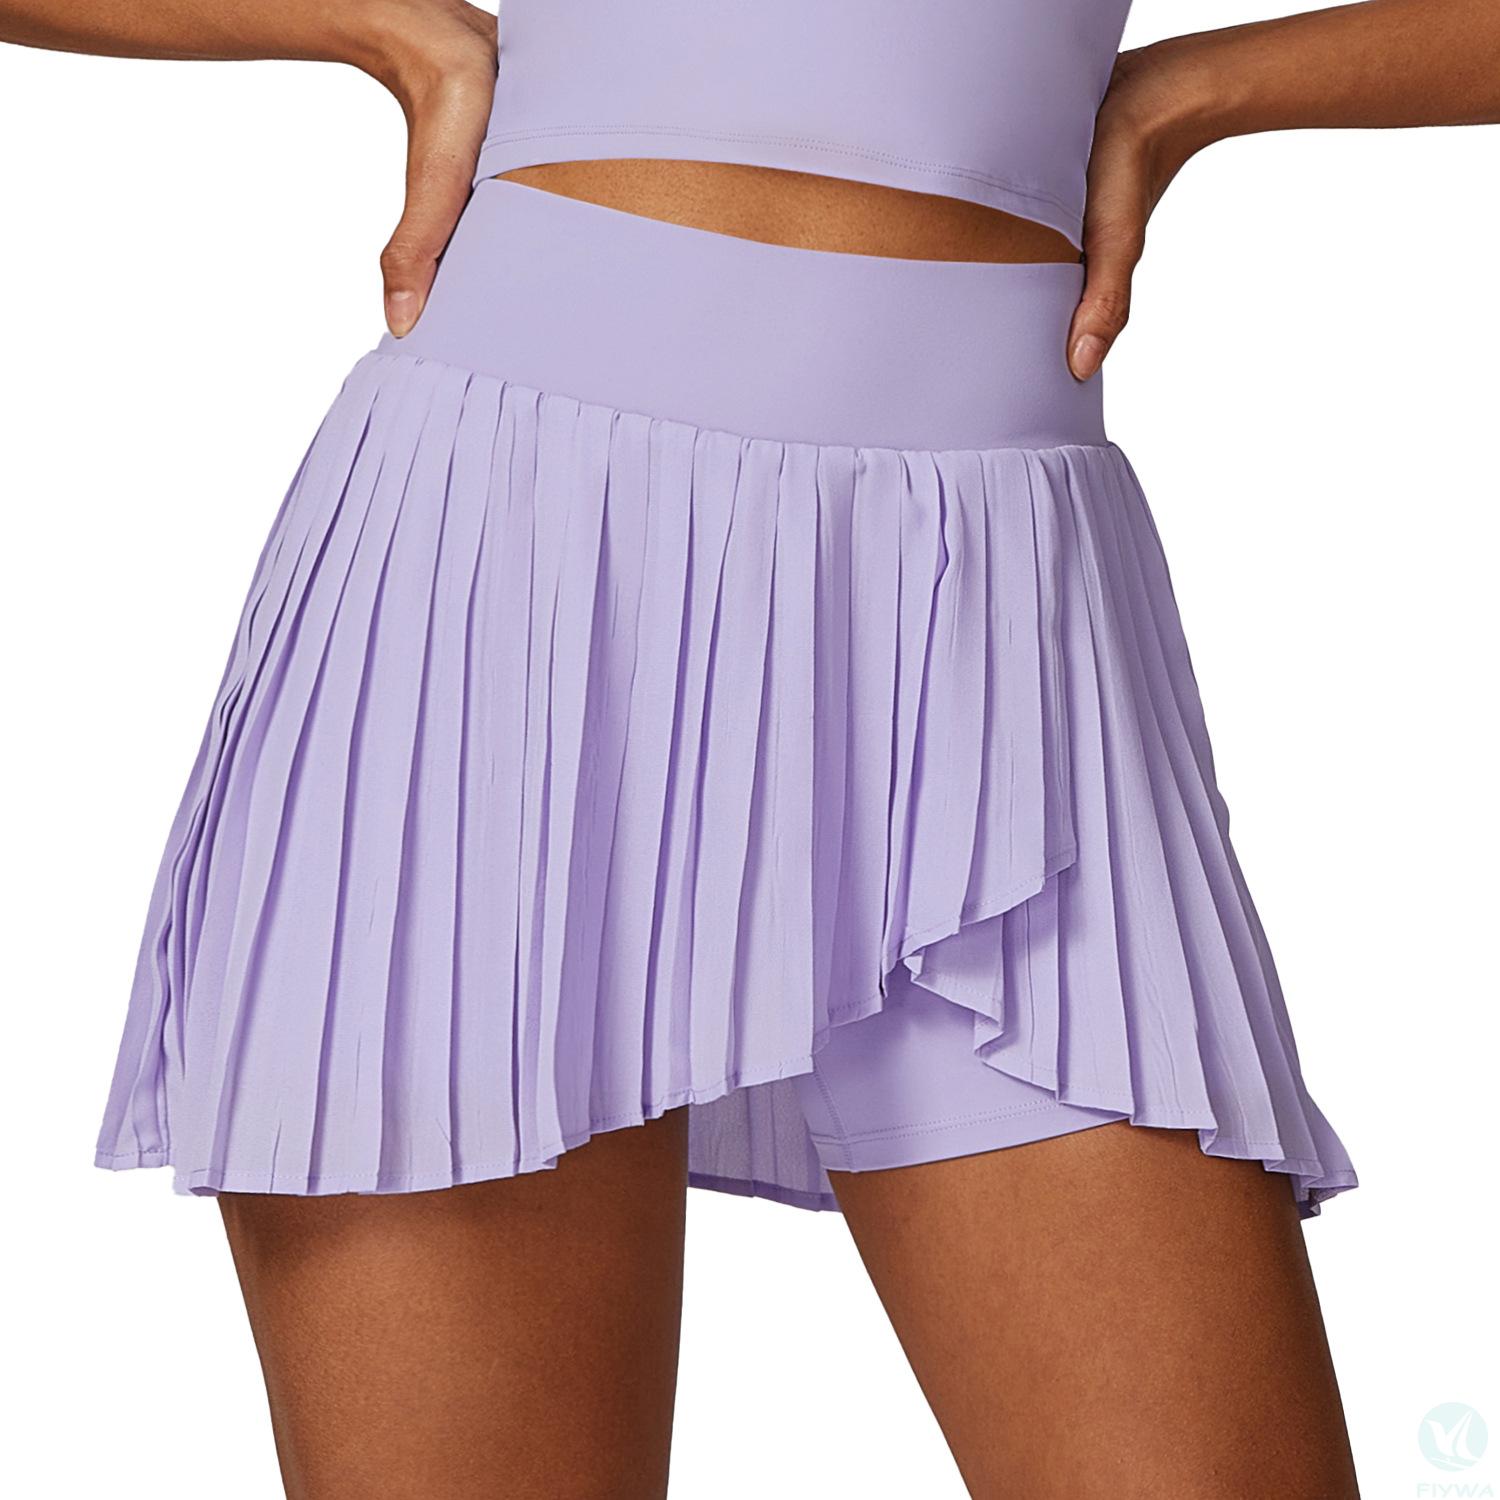 New Arrivals Gym Clothes Tennis Running Quick Dry Mini Skorts Anti-flashing Workout Short Skirts for Women FLY-Q-004 - copy